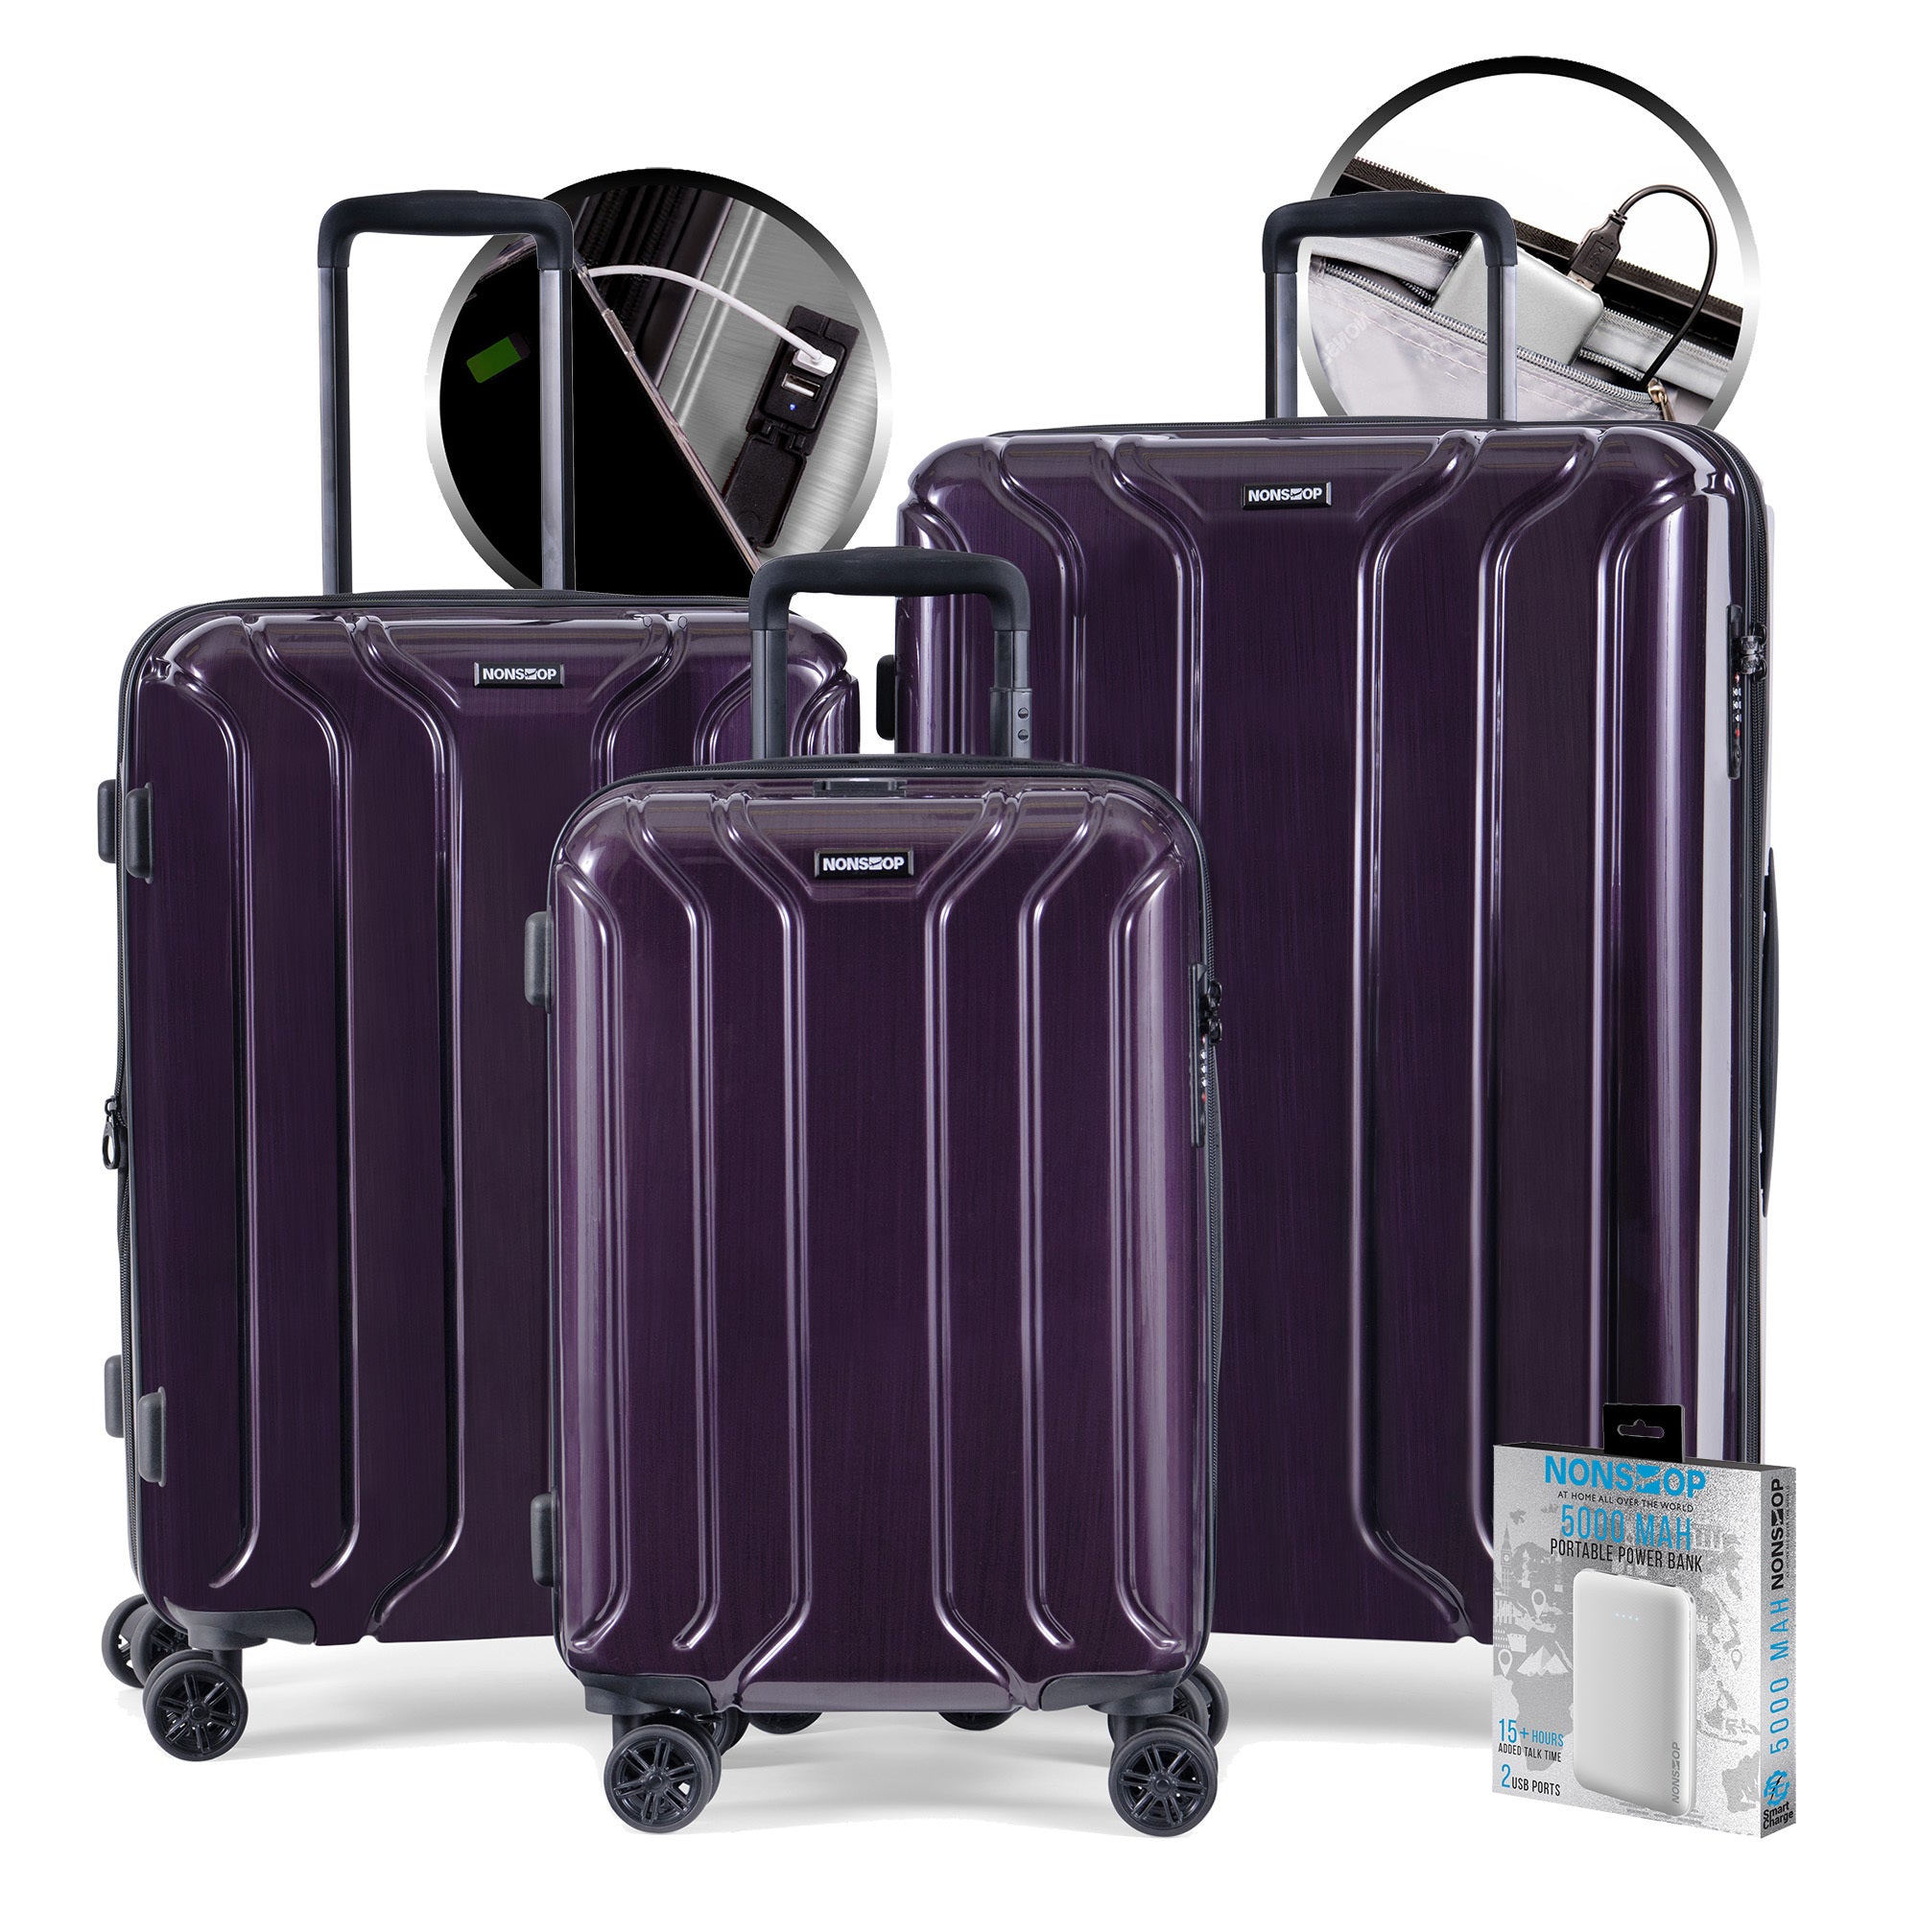 NONSTOP New York Elite Luggage Expandable Lightweight Spinner Wheels hard side shell Travel Suitcase Set, TSA Lock, Double USB Port, 3 packing cubes